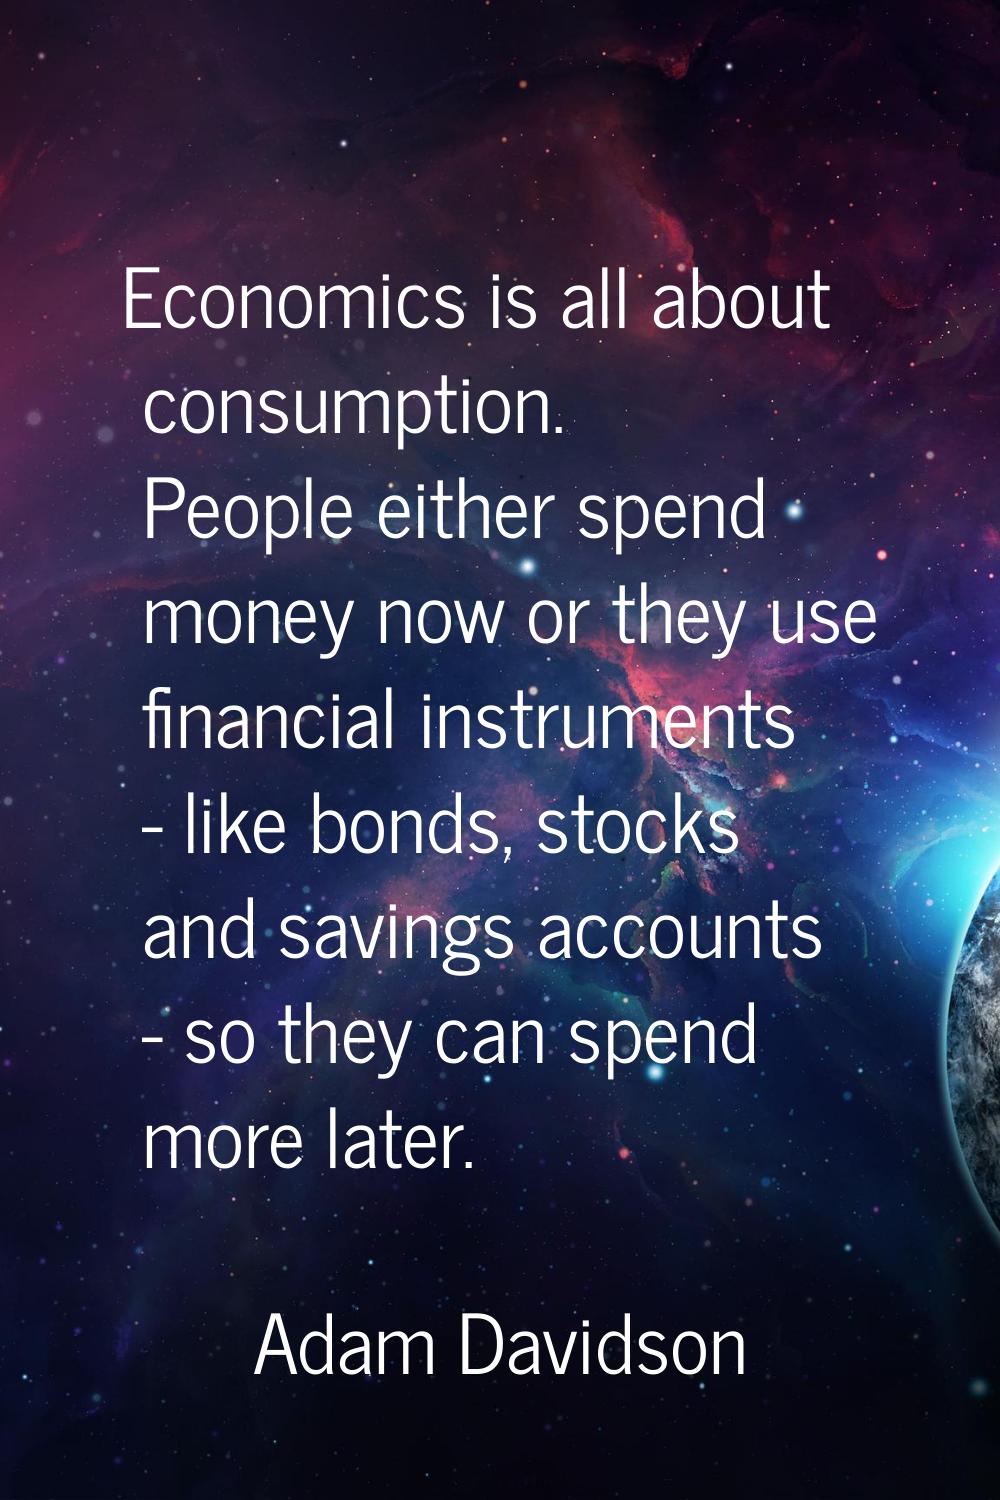 Economics is all about consumption. People either spend money now or they use financial instruments